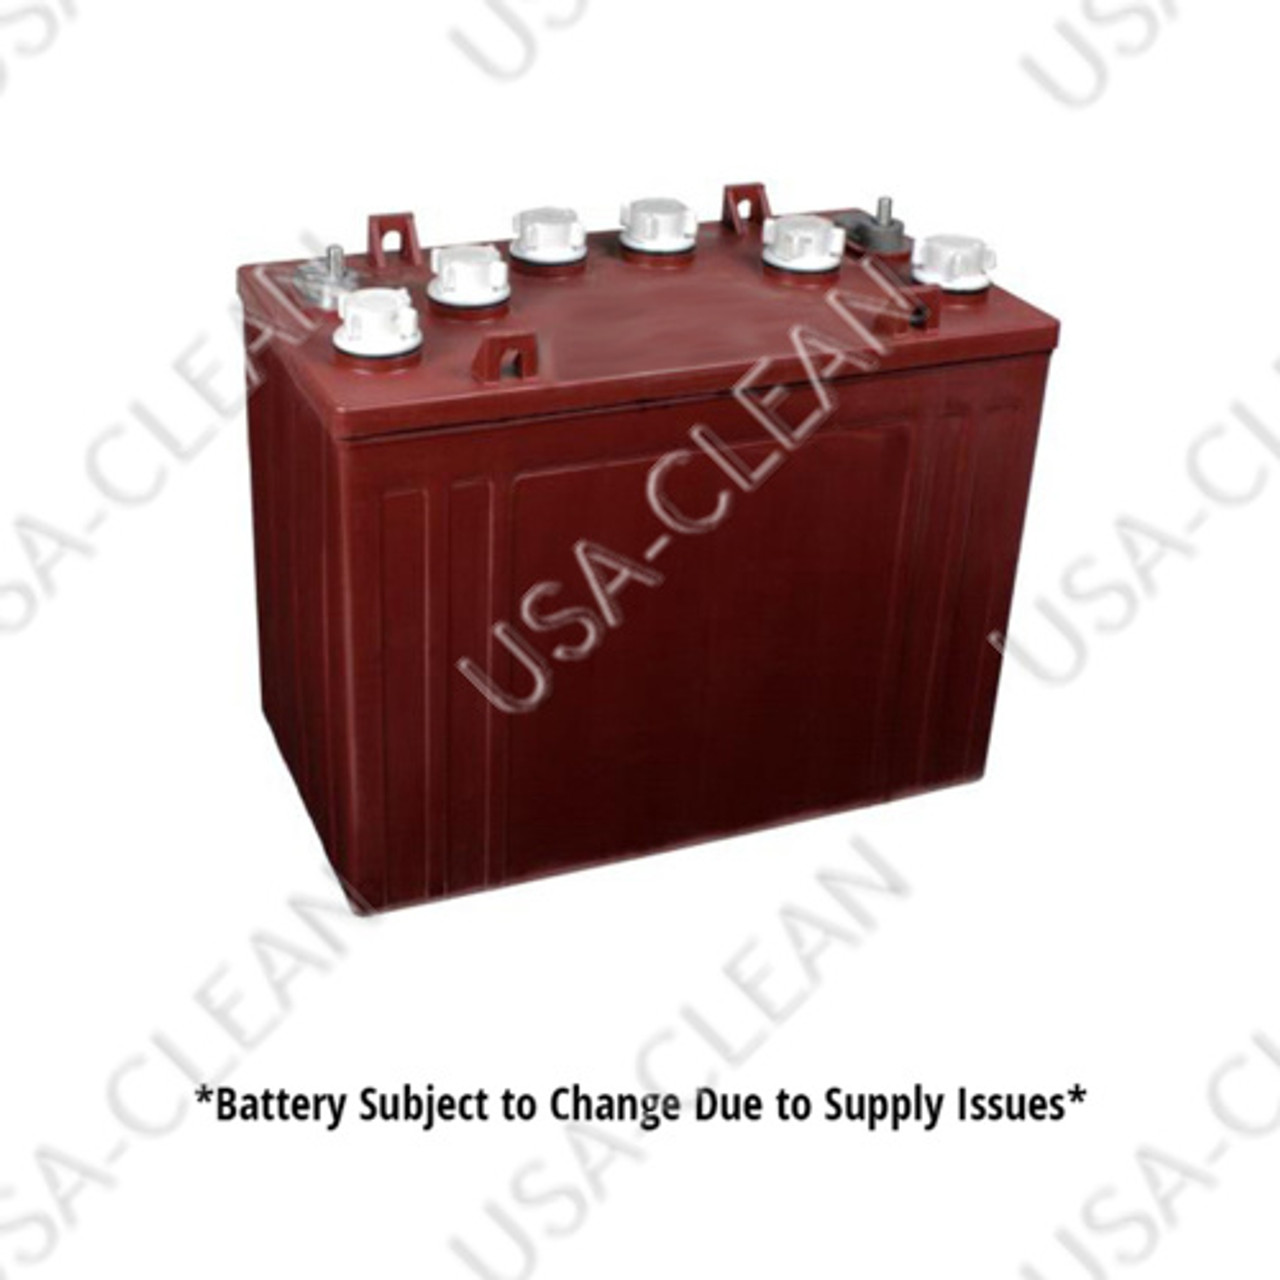 12V 150Ah wet battery (SNSR) 162-0057 – Ships Fast from Our Huge Inventory